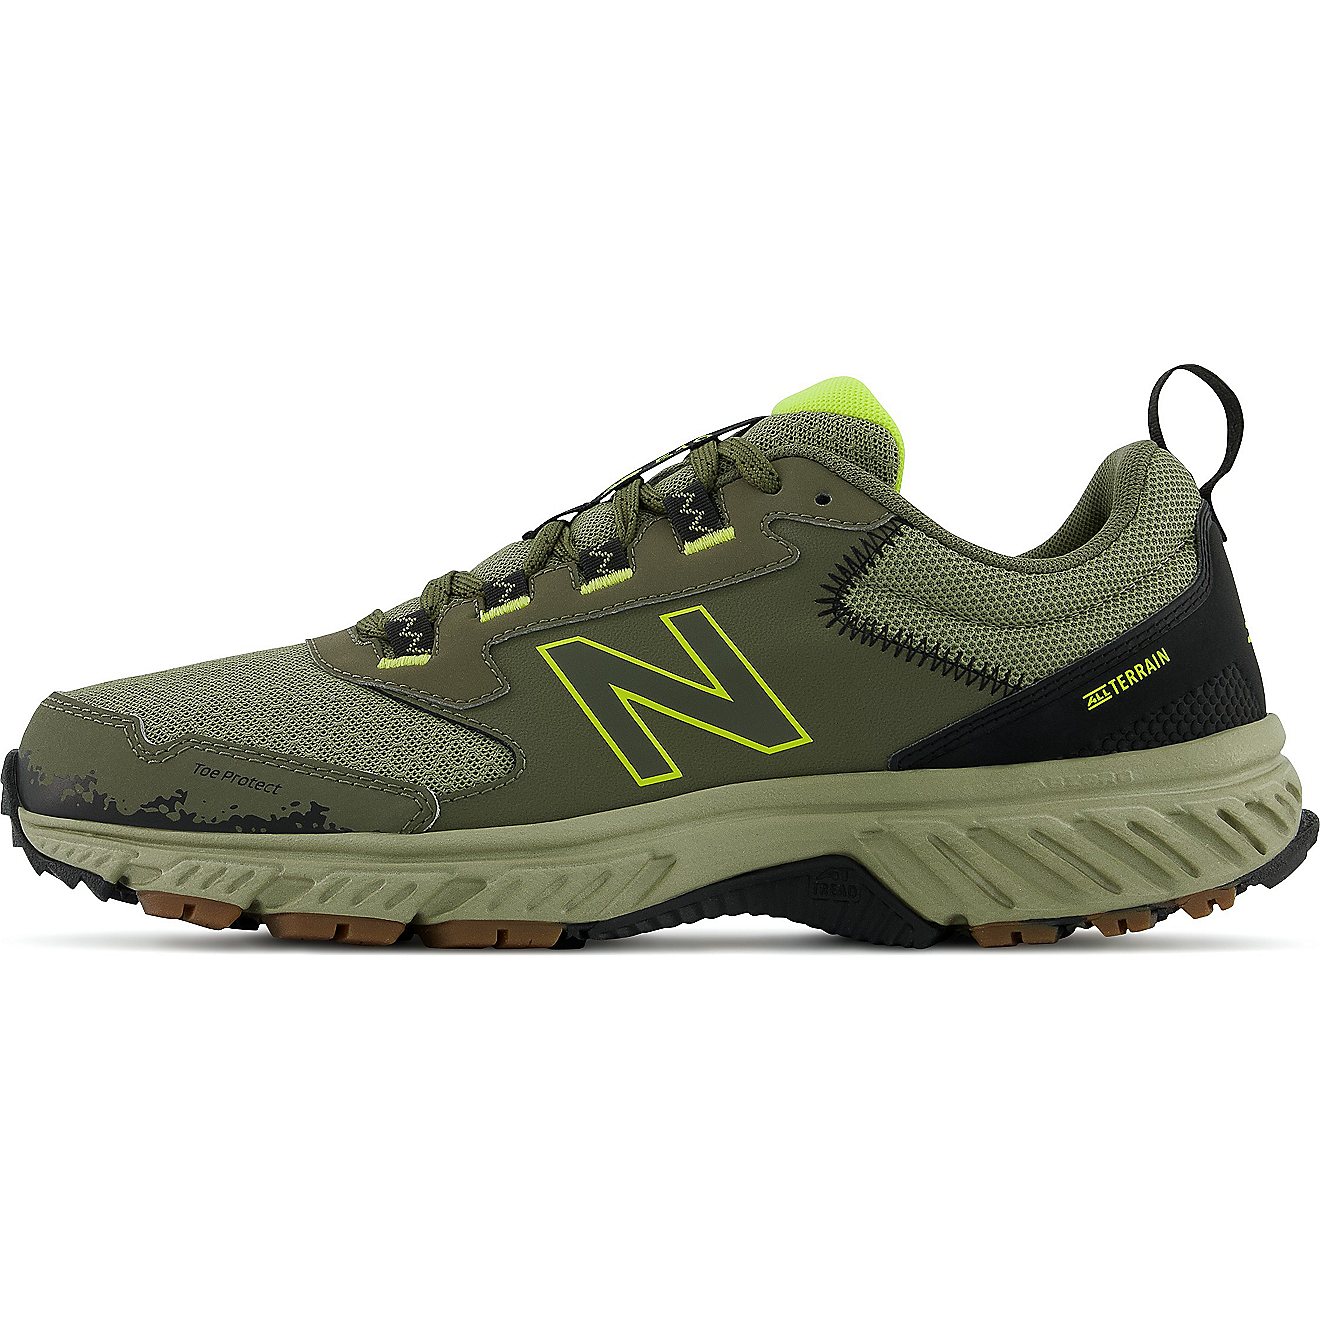 New Balance Men's 510 v5 Running Shoes                                                                                           - view number 2